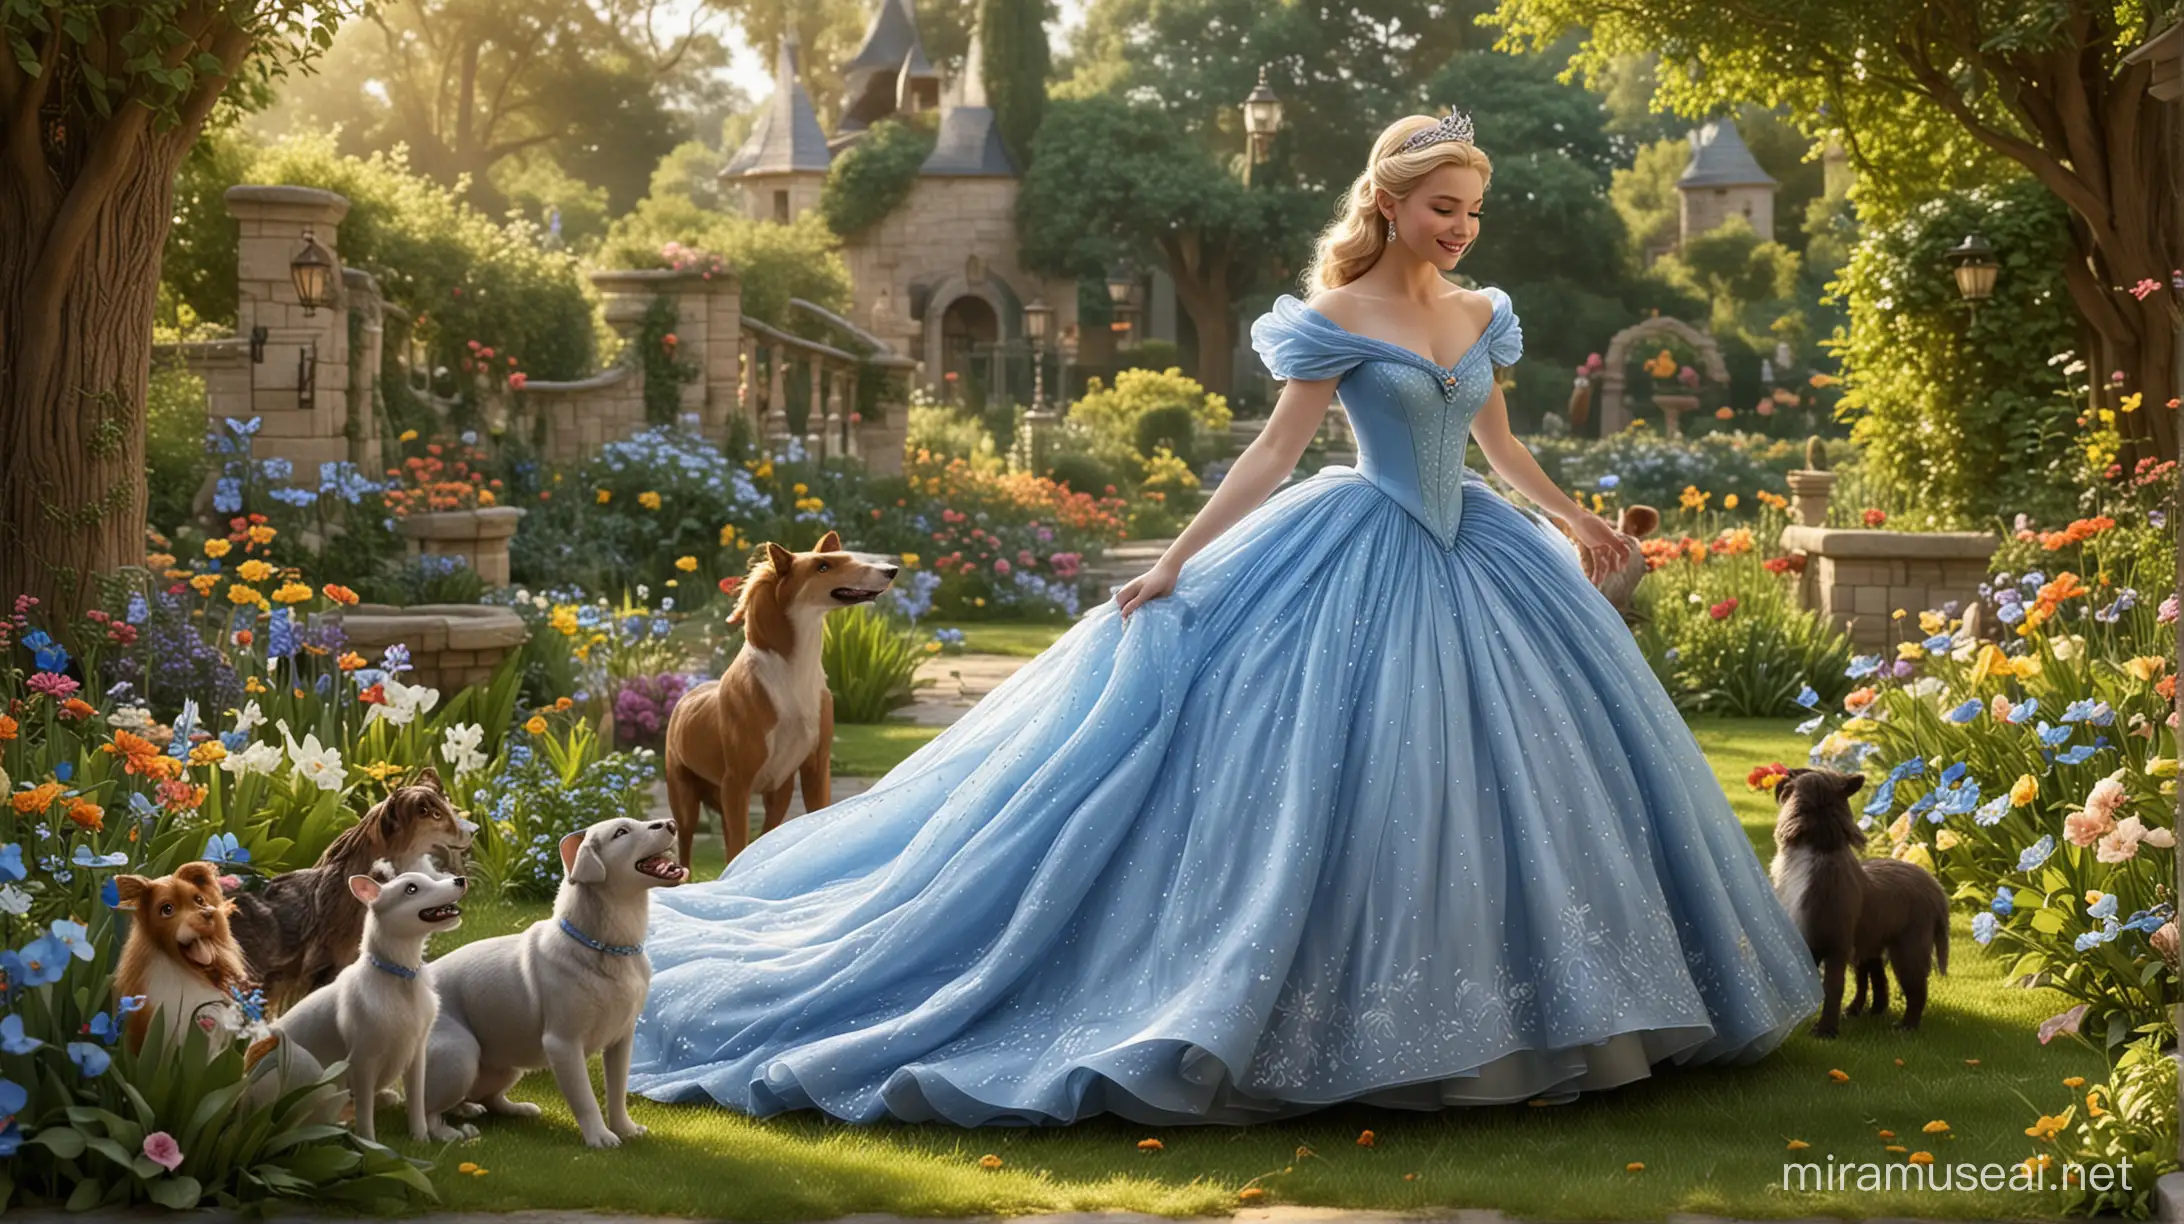 Cinderella Princess Playing with Animals in Enchanted Garden